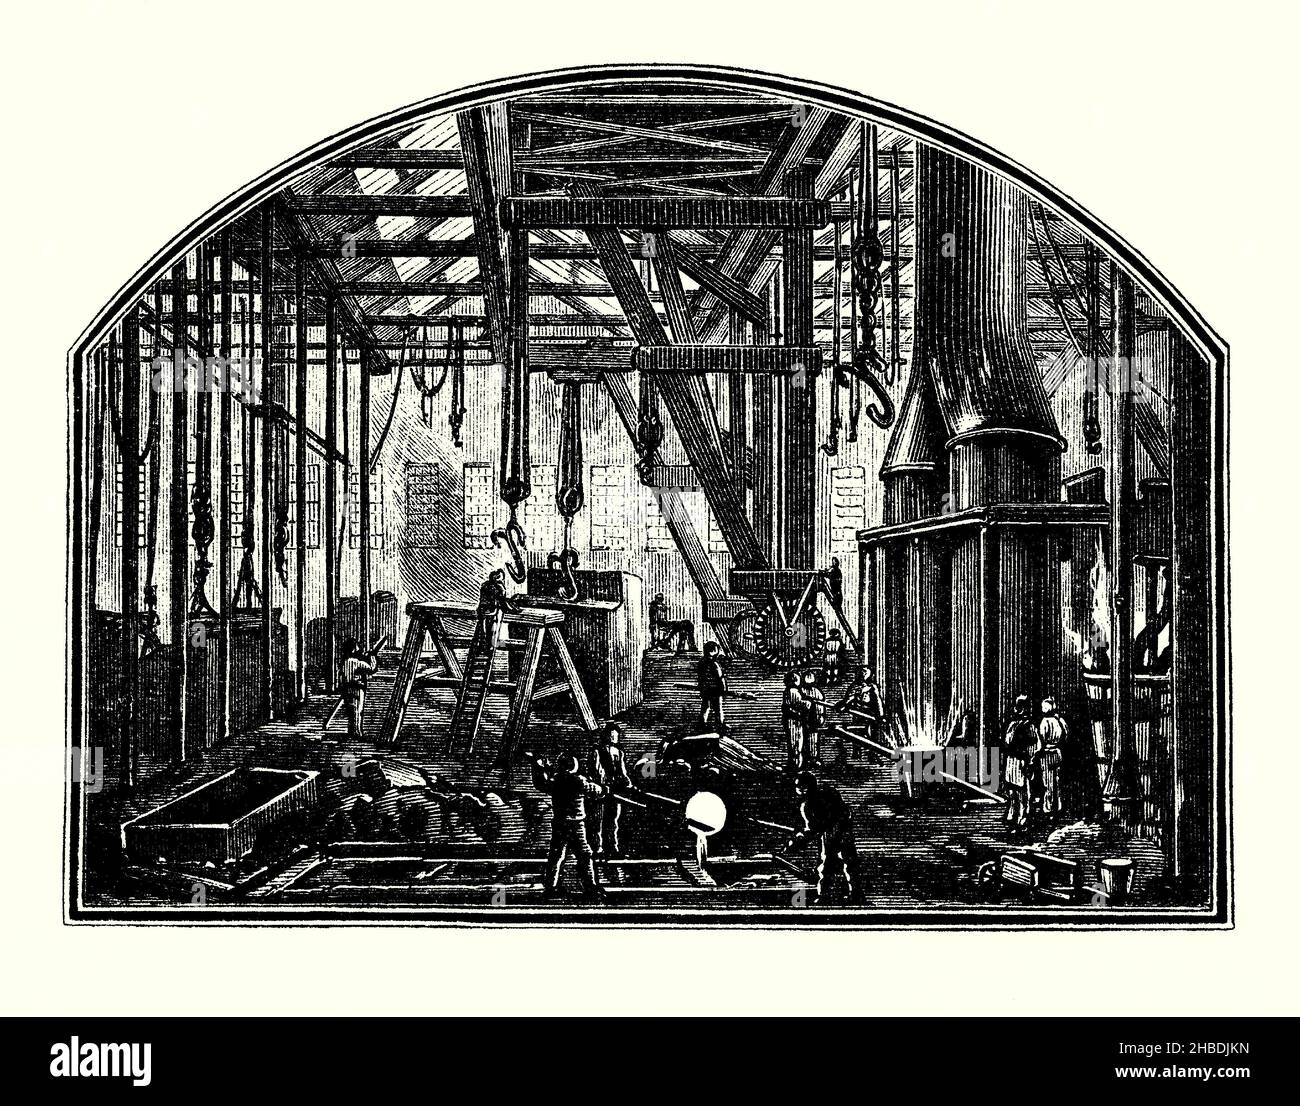 An engraving of an old Victorian metal foundry. Shown right are the furnaces for melting metal and foreground workers pour molten metal into moulds. Hand-cranked cranes and hoists are clearly visible. It is from a Victorian book of the 1890s on discoveries and inventions during the 1800s. A foundry is a factory or workshop that produces metal castings. Metals are cast into shapes by melting them in a furnace into a liquid, pouring the metal into a mould, and removing the mould material after the cooled metal has solidified leaving the cast metal in the required shape or design. Stock Photo